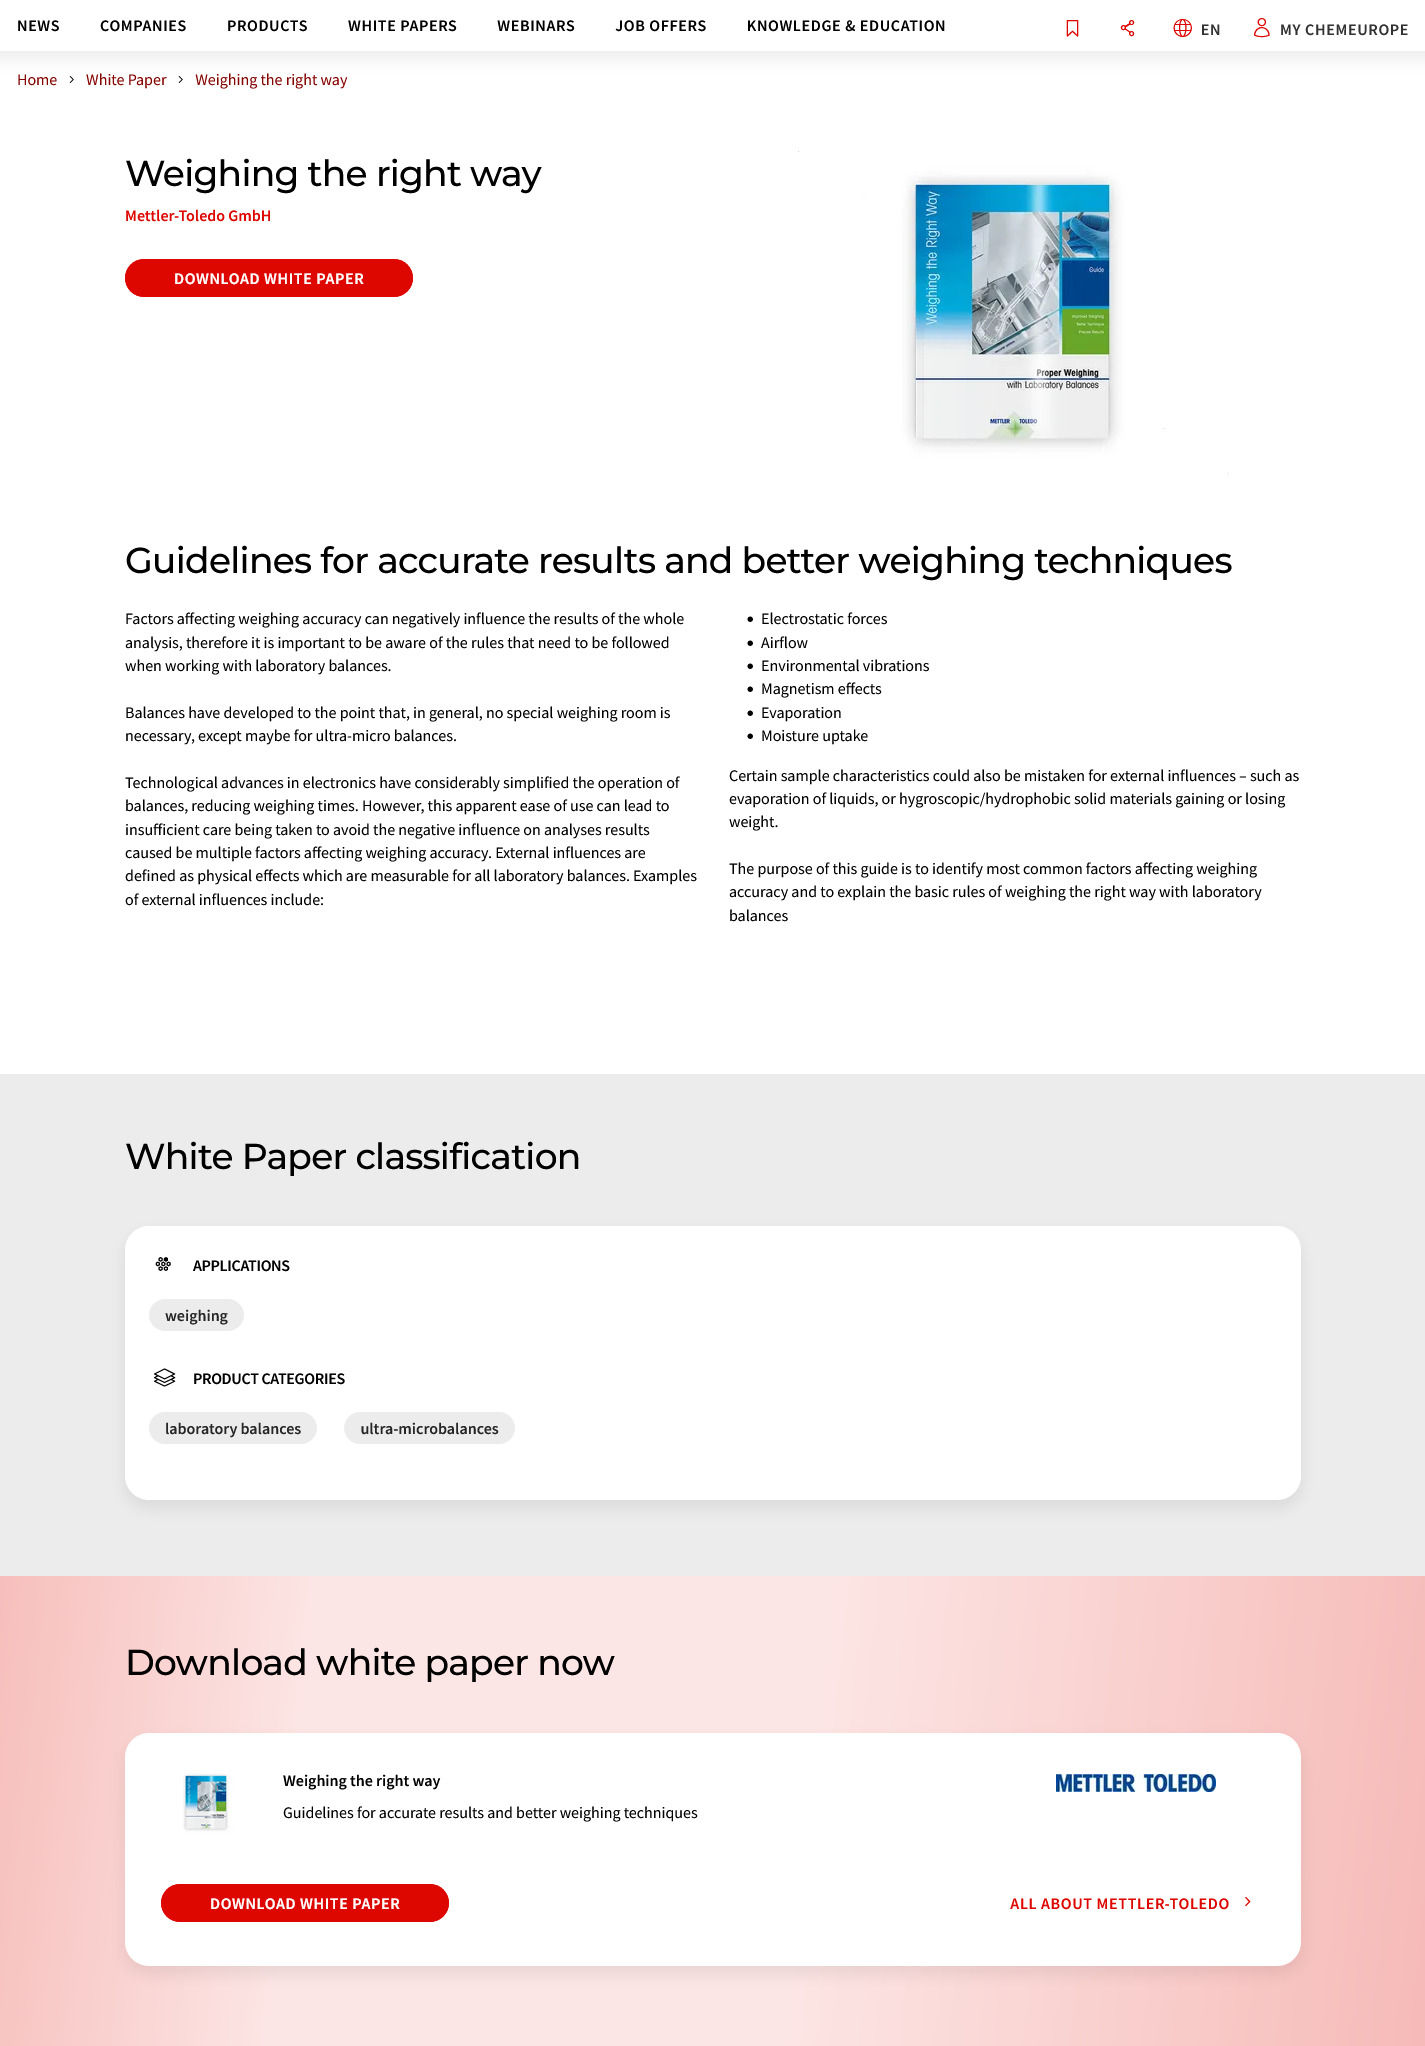 Advertise white papers